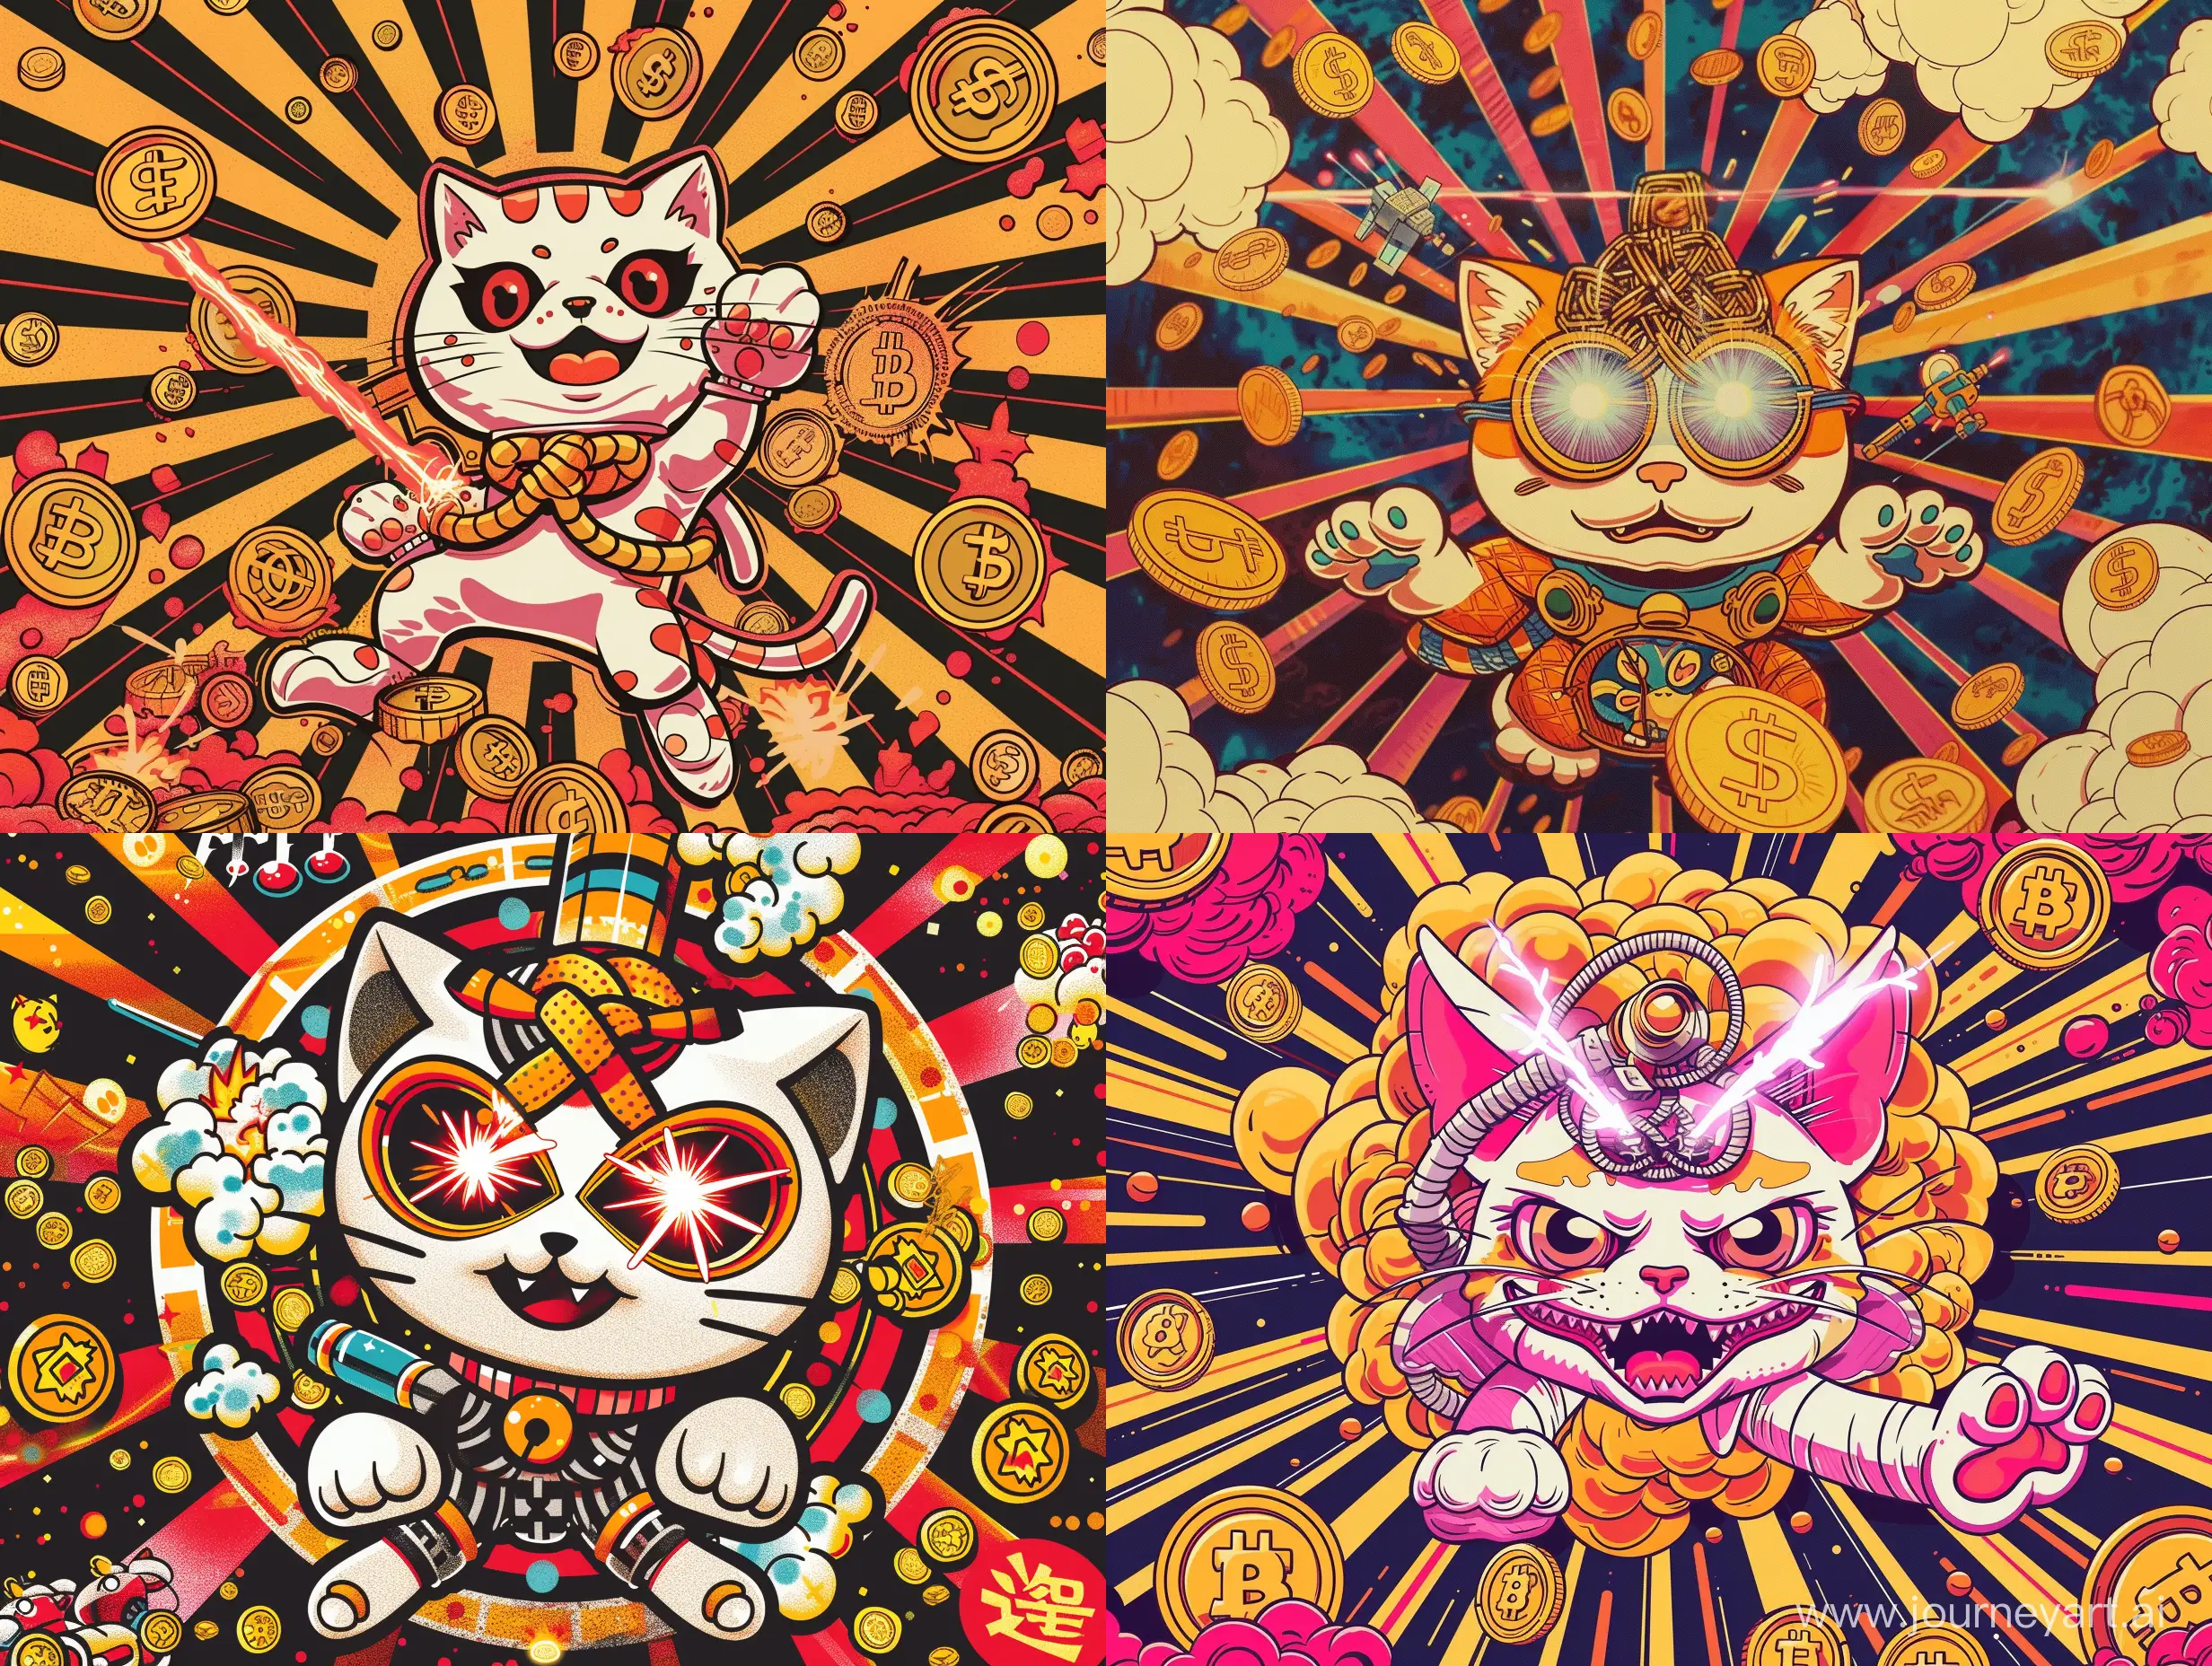 japanese mascot, Cartoon stickers in the 1980s japan,cute versions of characters, exaggerated movements, a lucky cat with a mechanical knot emits lasers in its eyes, and the background is full of gold coins, radiation background, rich details